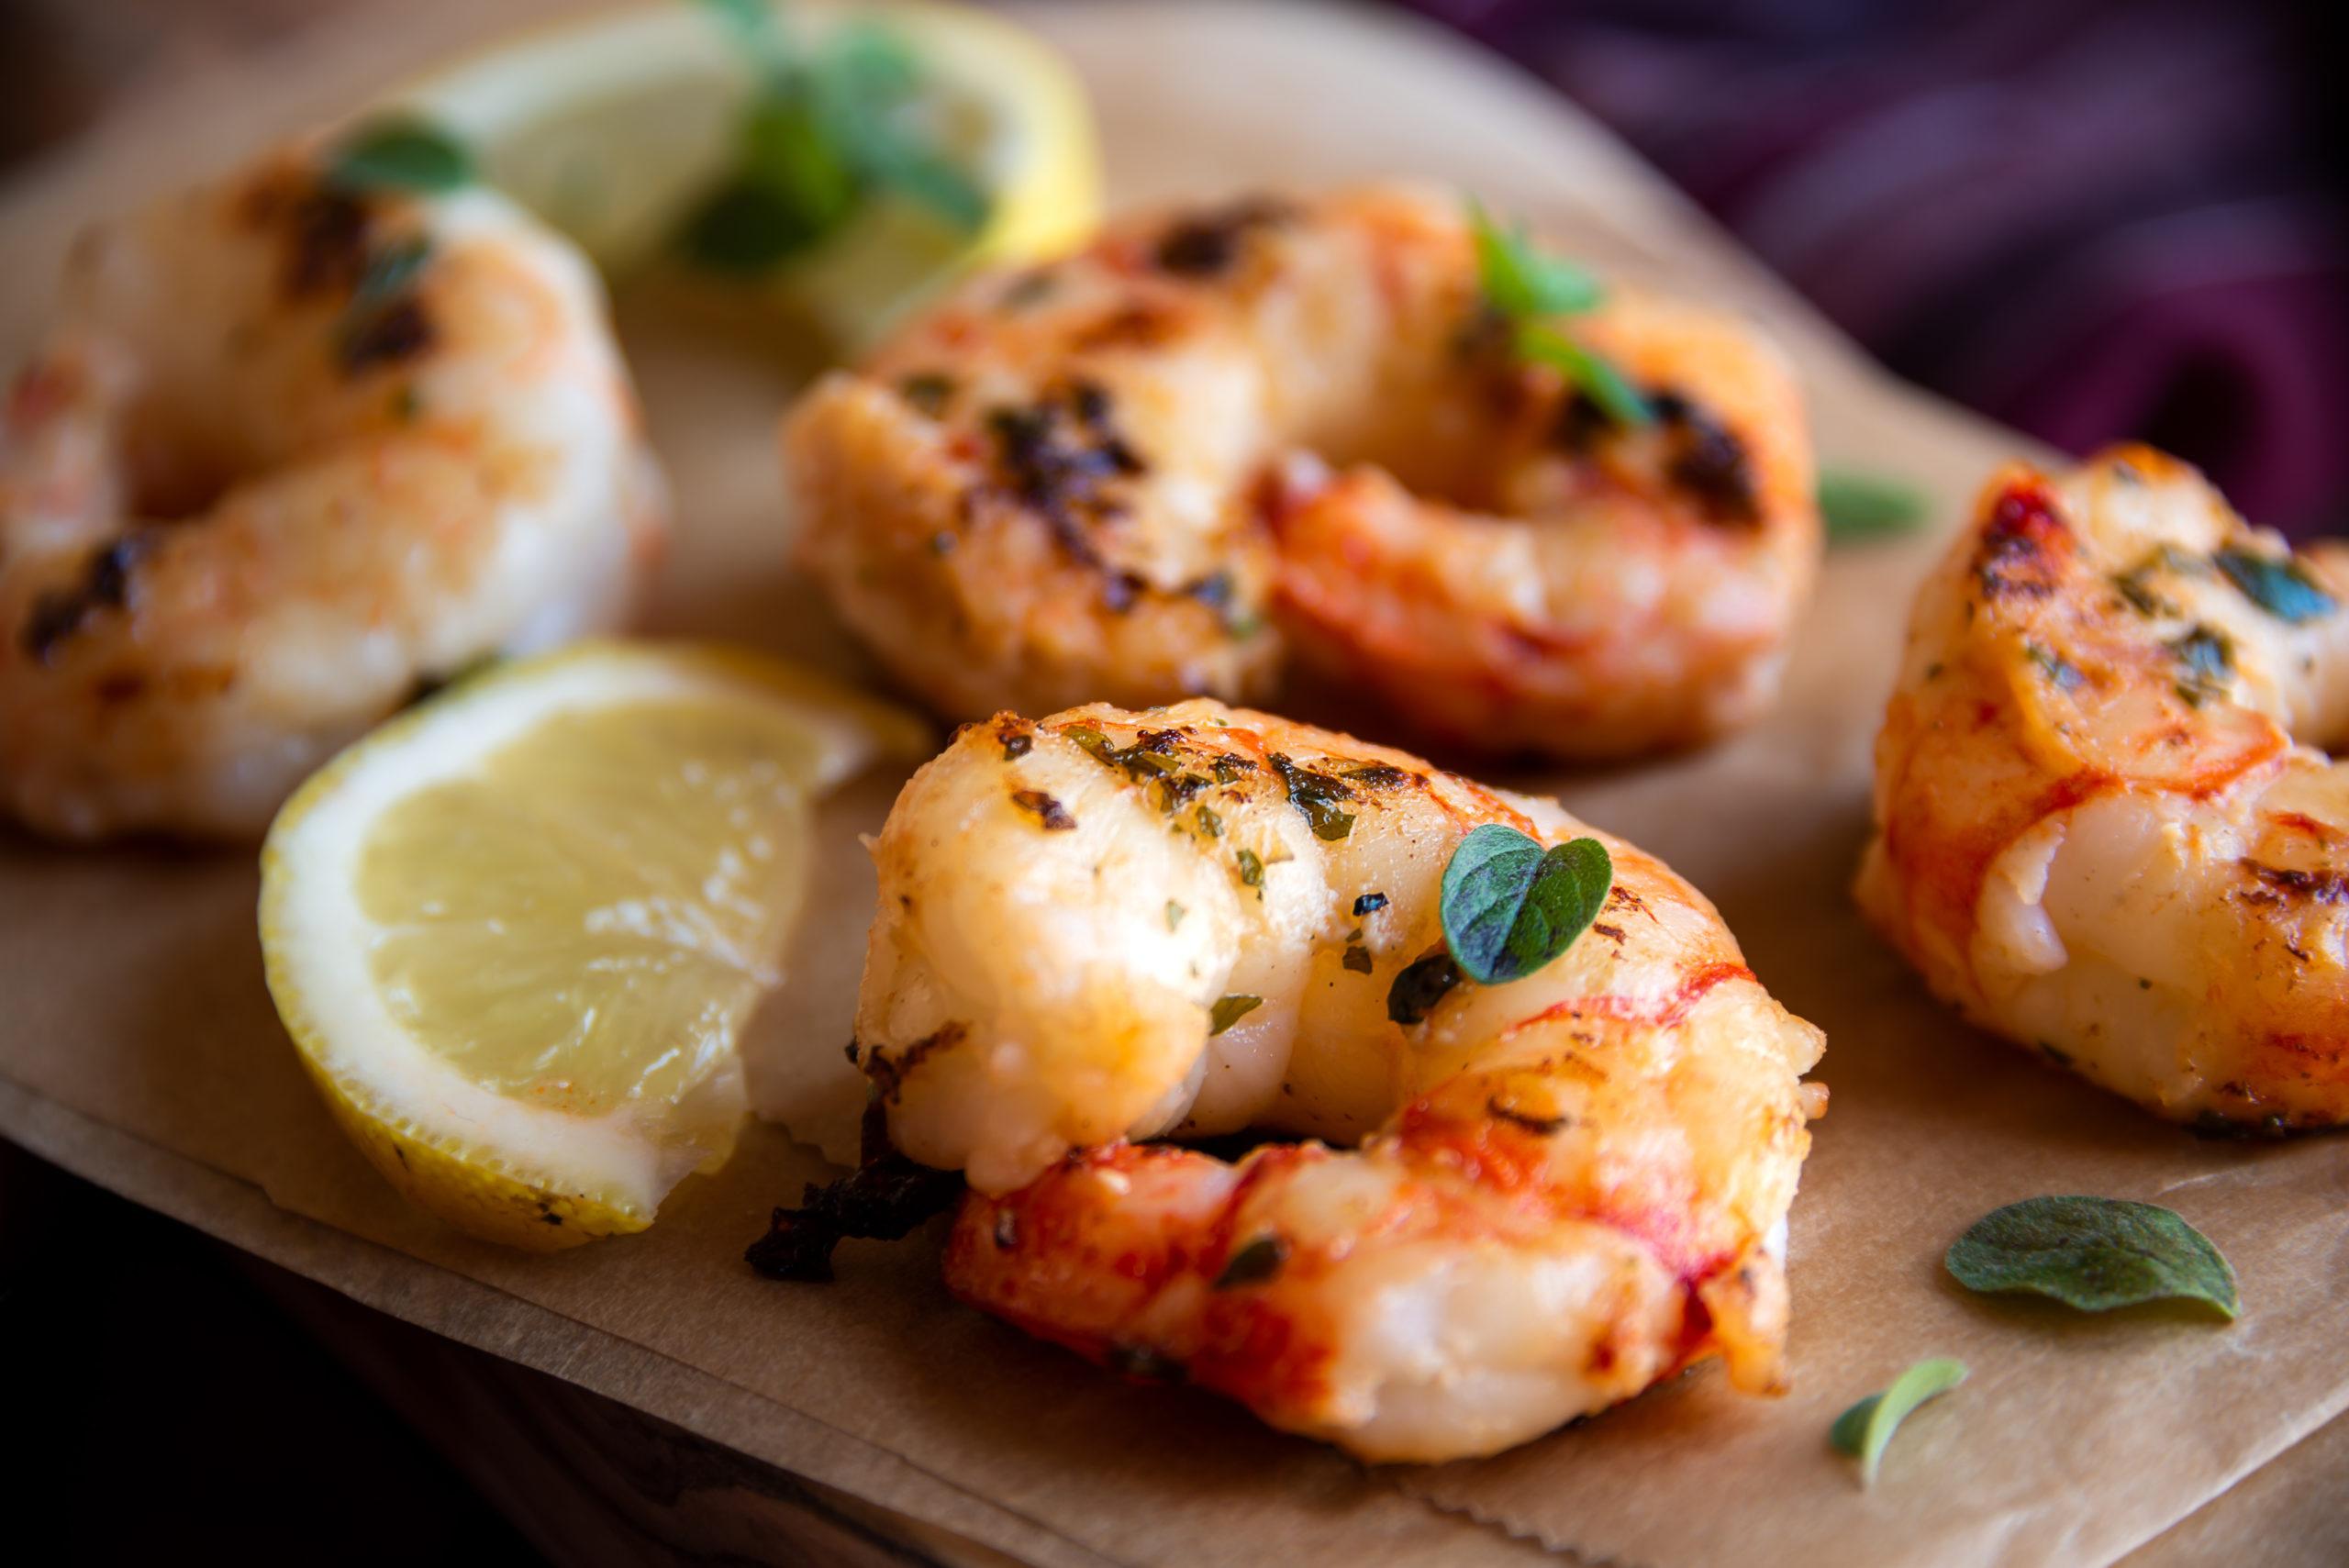 Roasted shrimps with lemon and herbs, healthy seafood snack